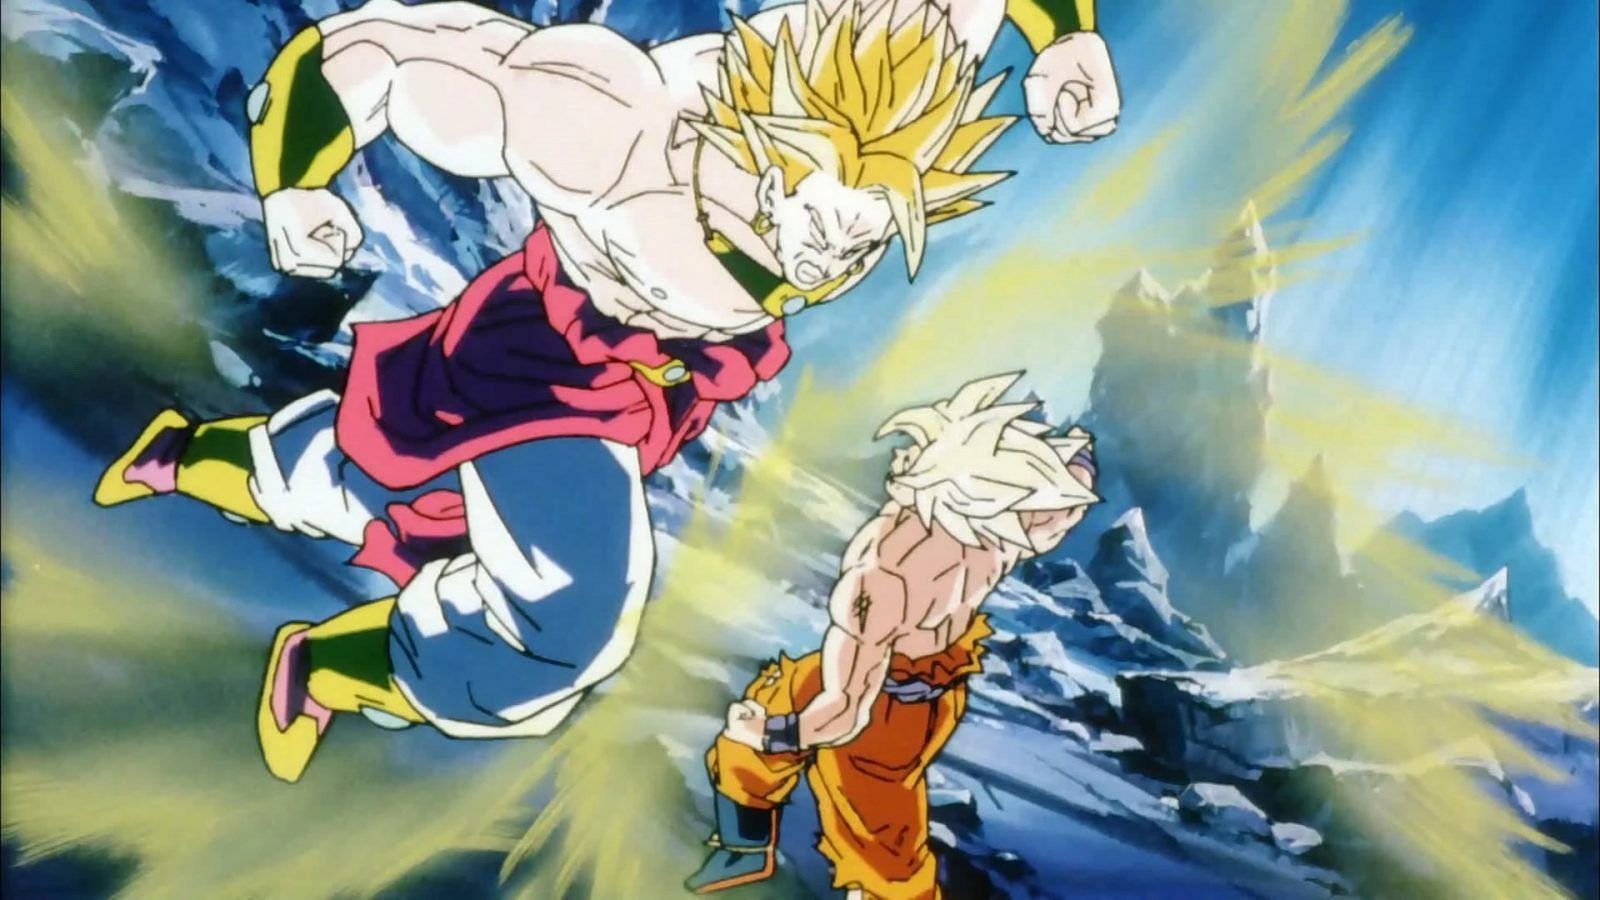 What Happens To Goku And Vegeta After Dragon Ball Super: Broly